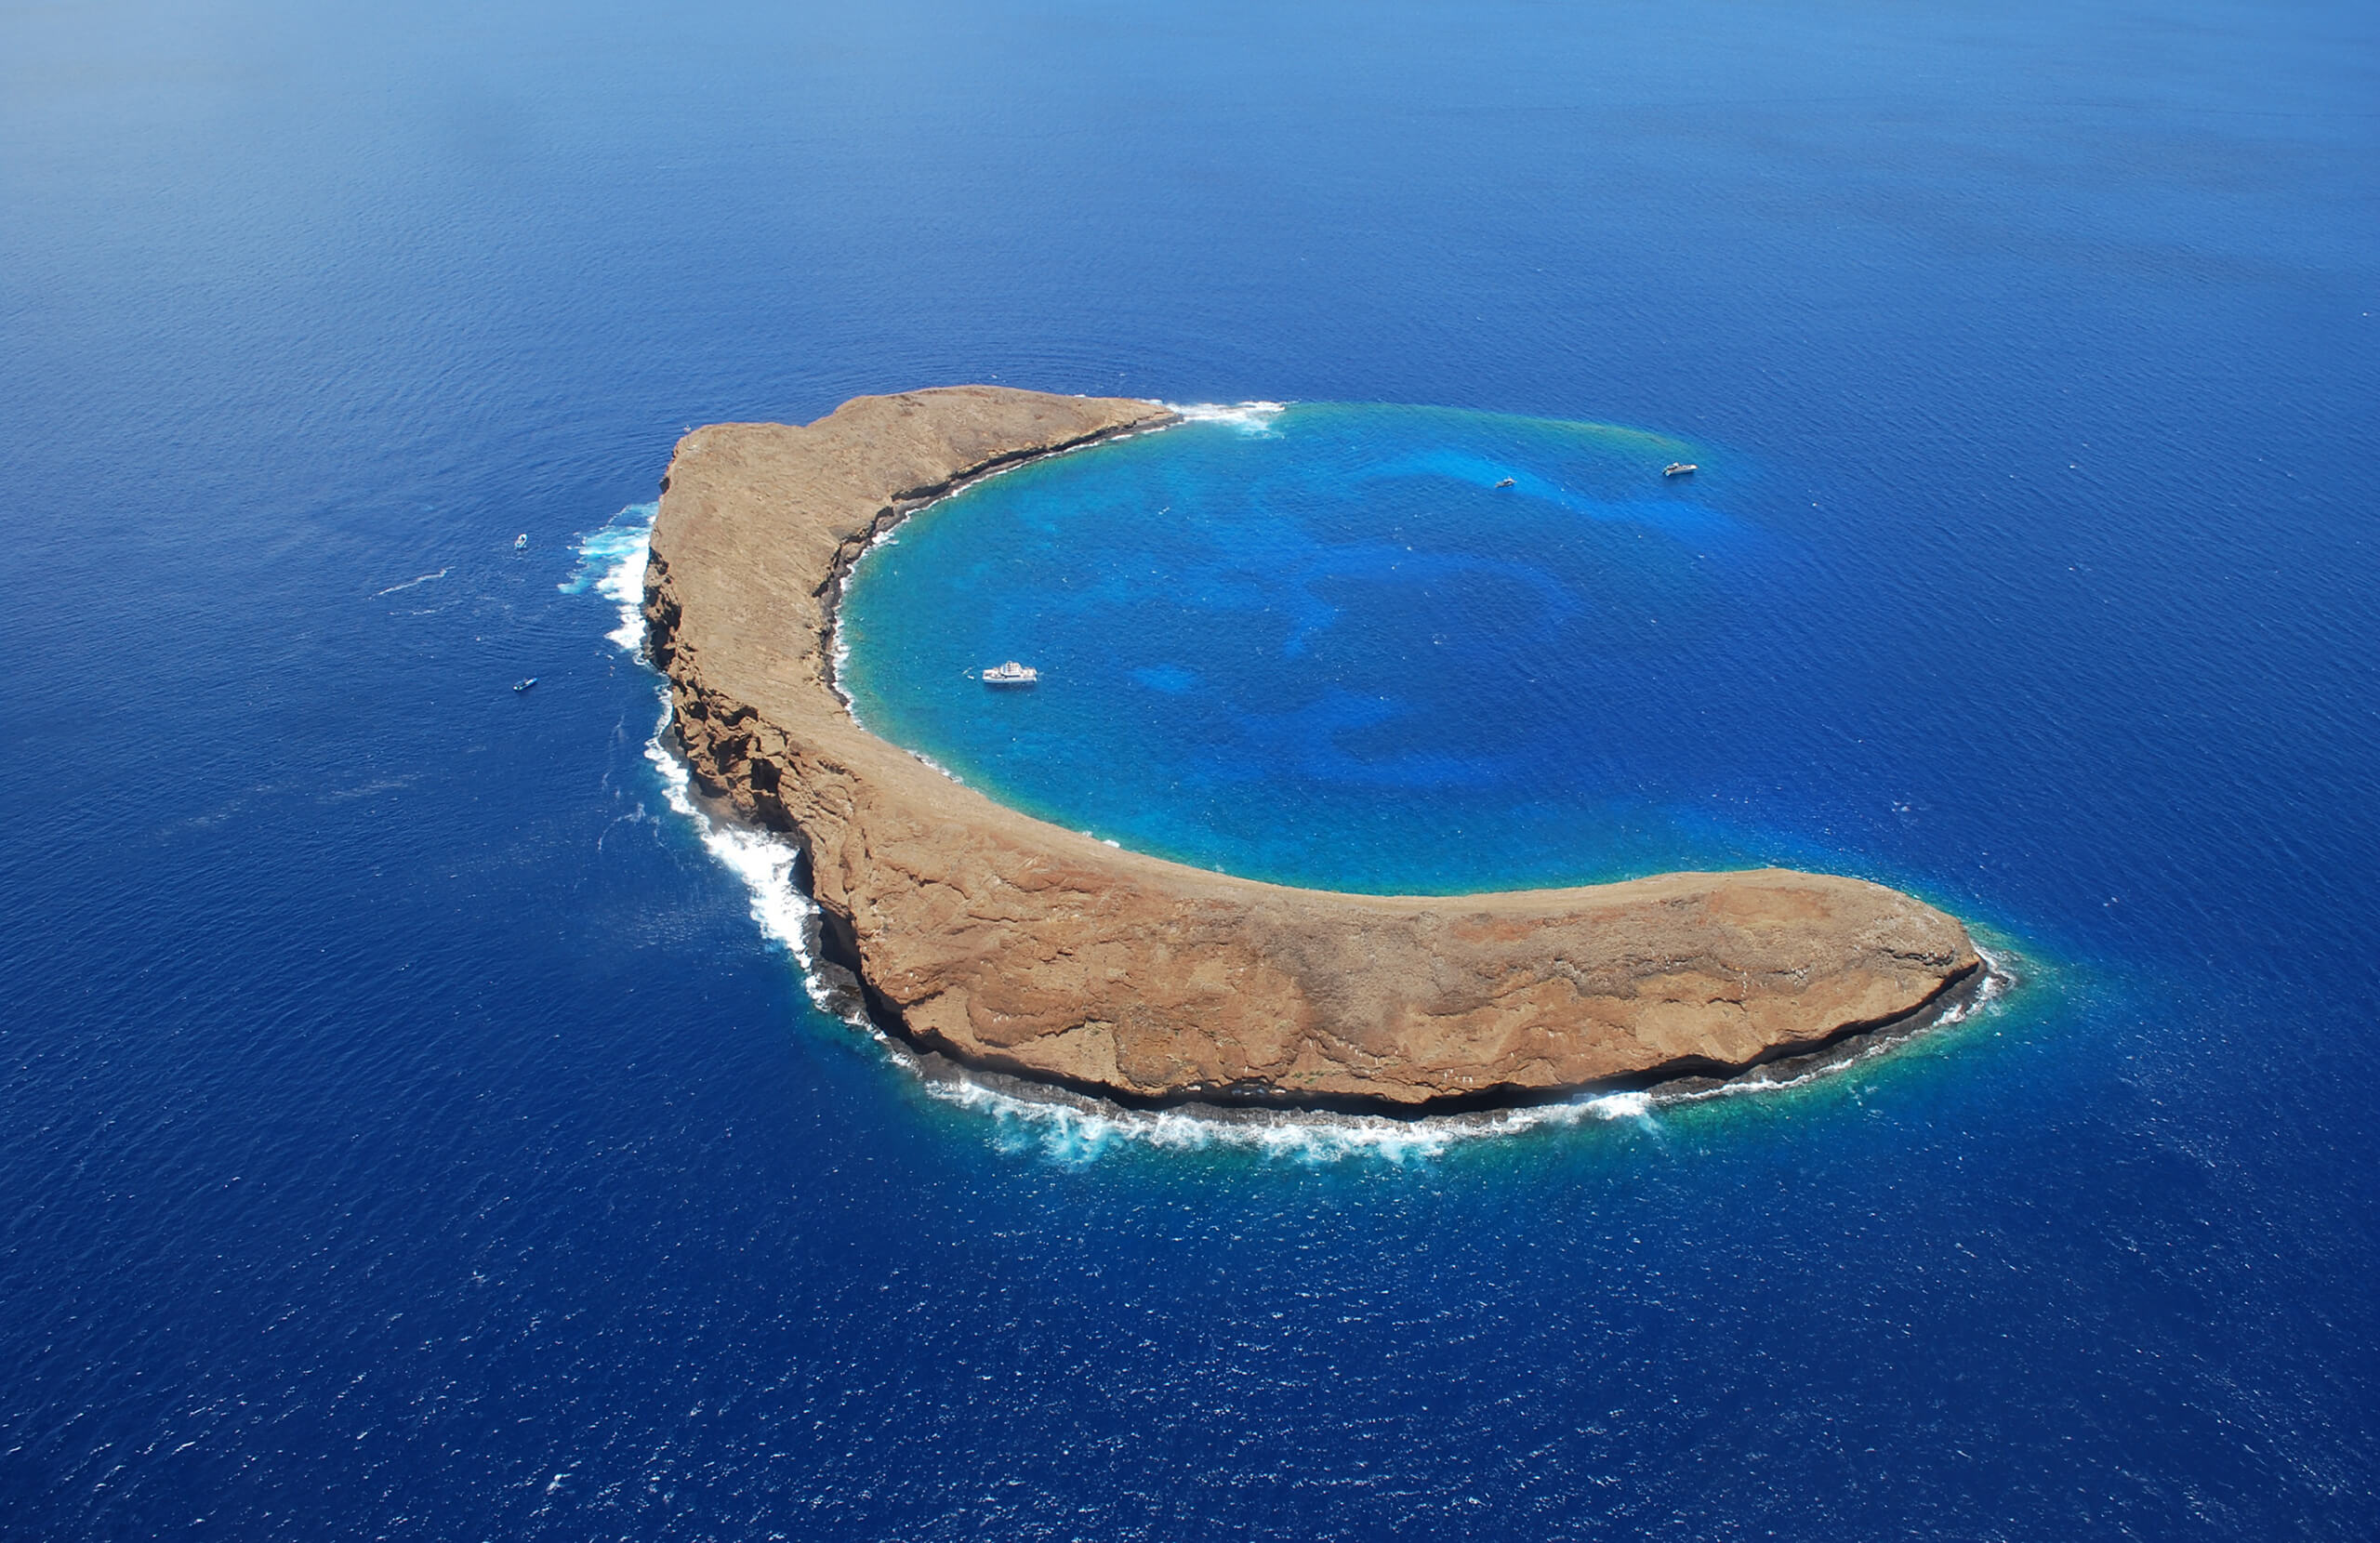 Aerial view of Molokini crater and surrounding ocean